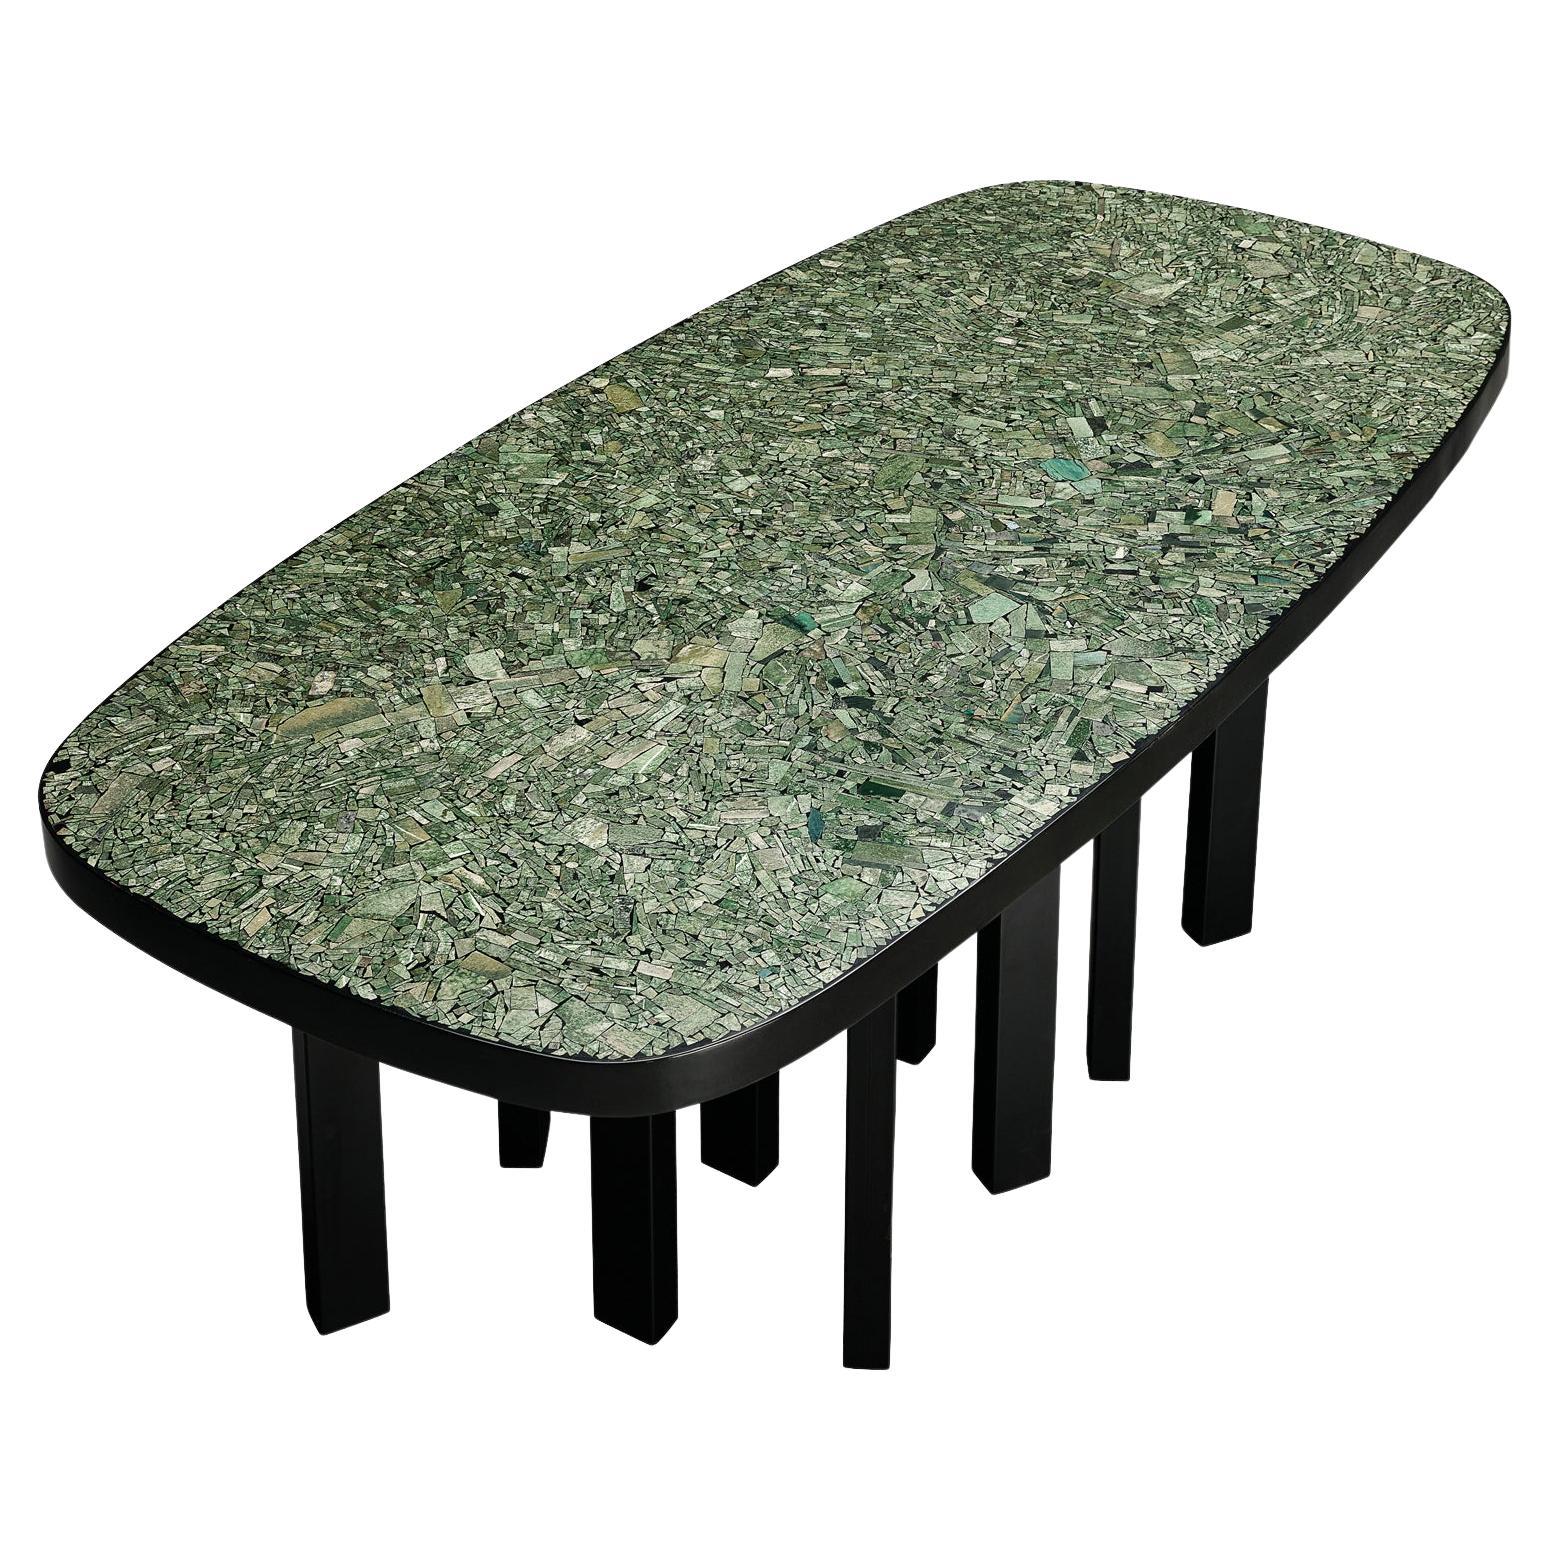 Ado Chale Oval Dining Table with Mosaic Top in Jade Wyoming 